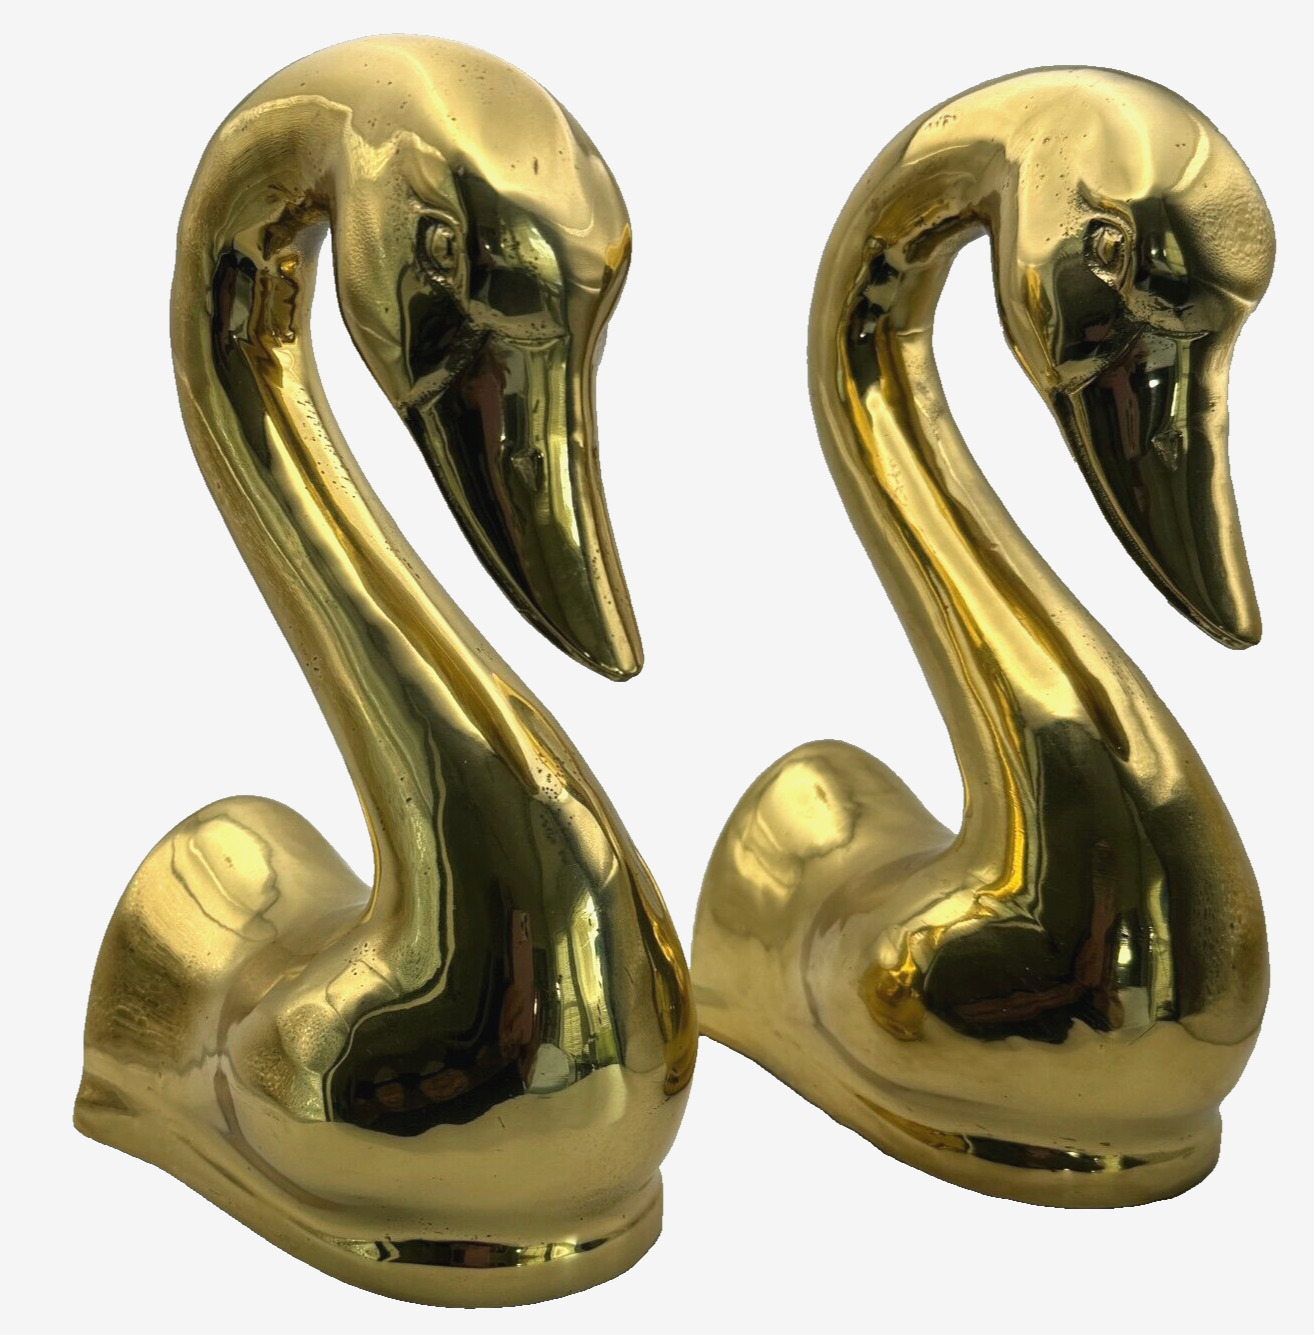 Brass Swan Goose Head Bookends Pair 8 inch Vintage Decorative